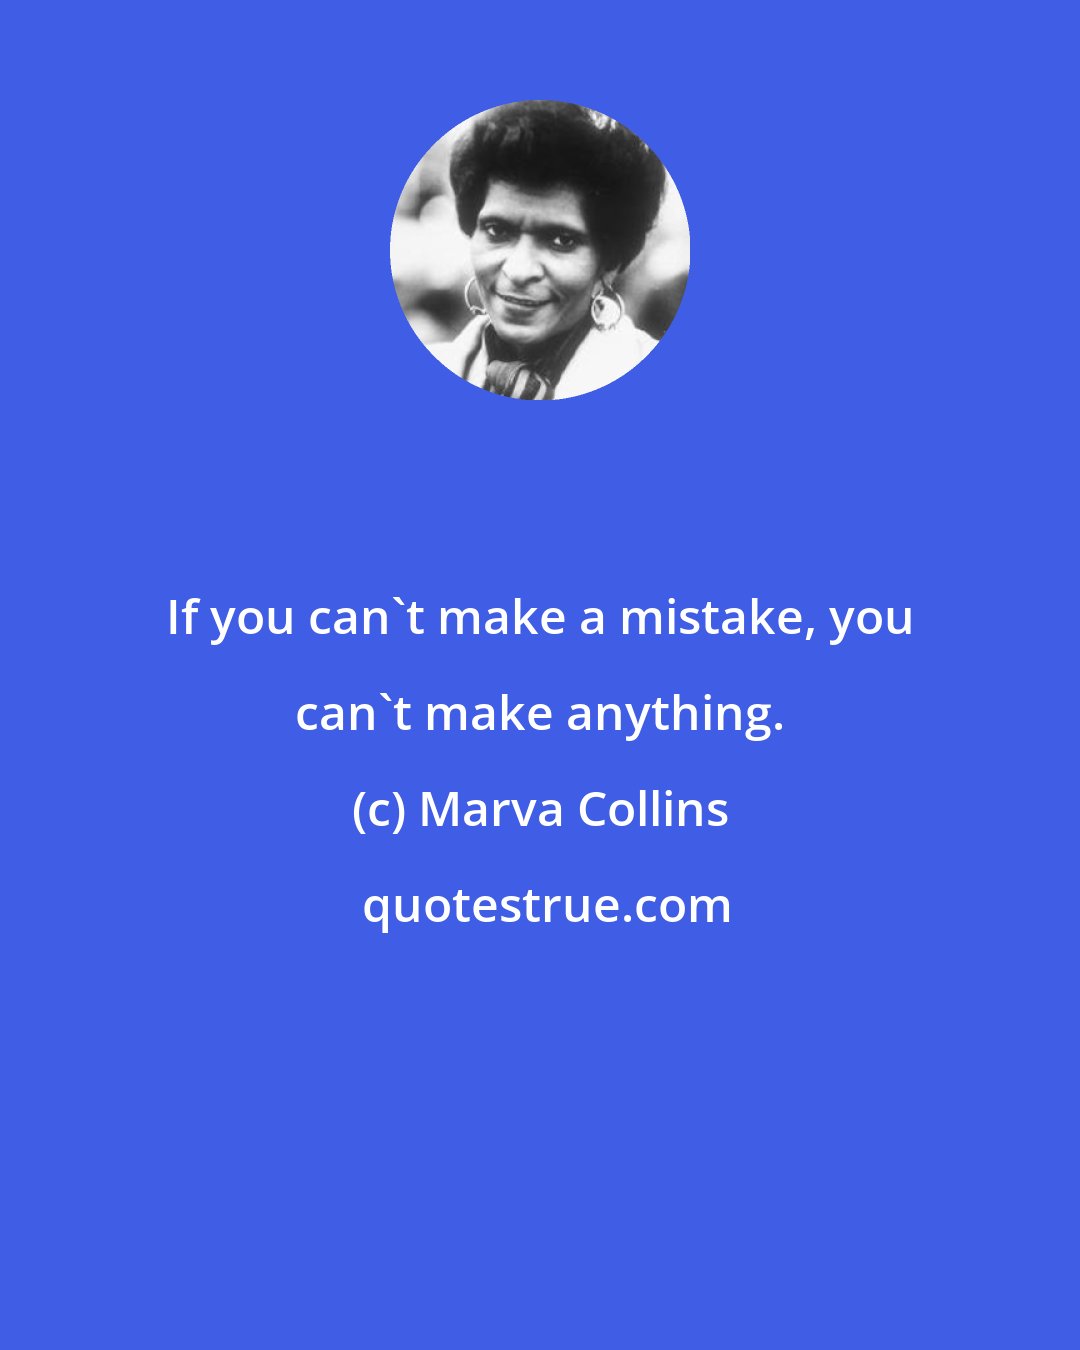 Marva Collins: If you can't make a mistake, you can't make anything.